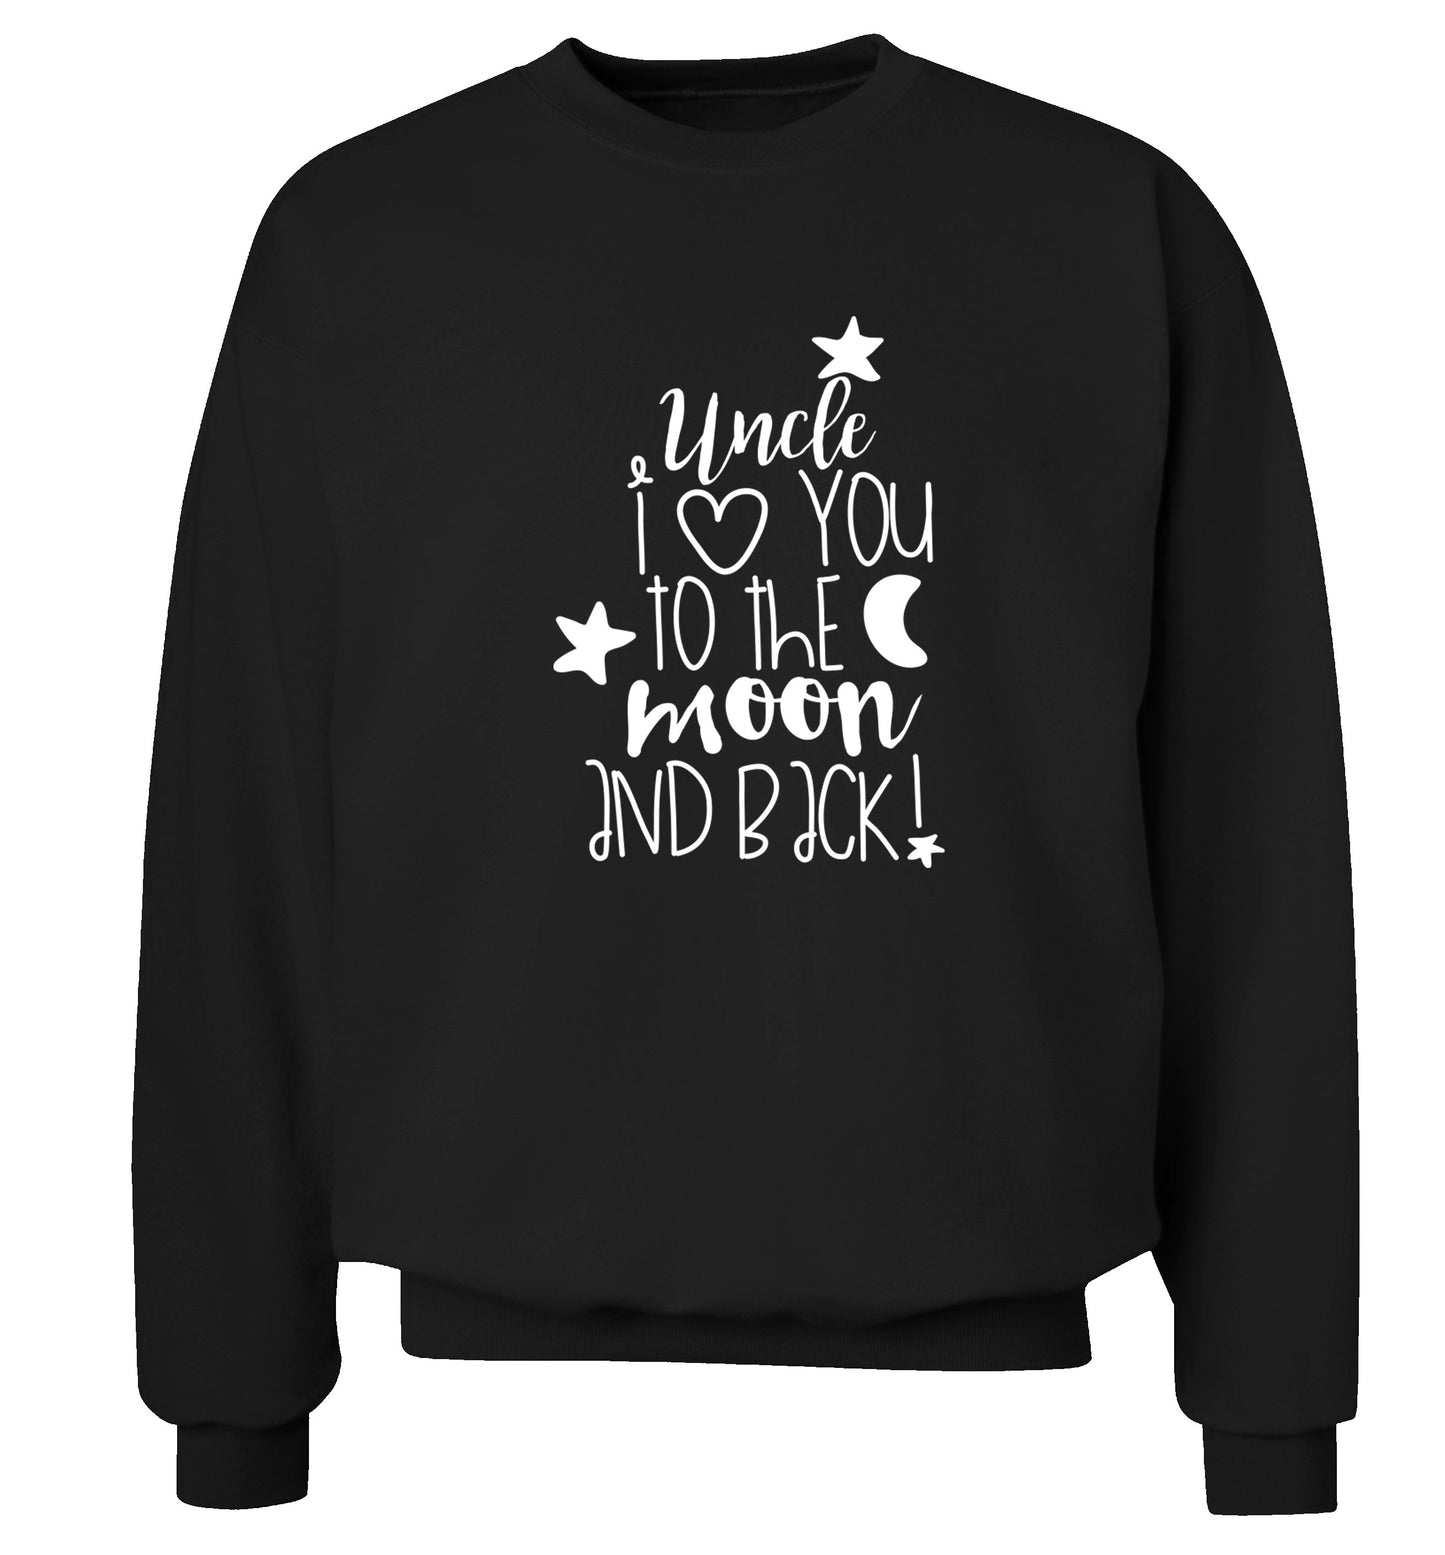 Uncle I love you to the moon and back Adult's unisex black  sweater 2XL